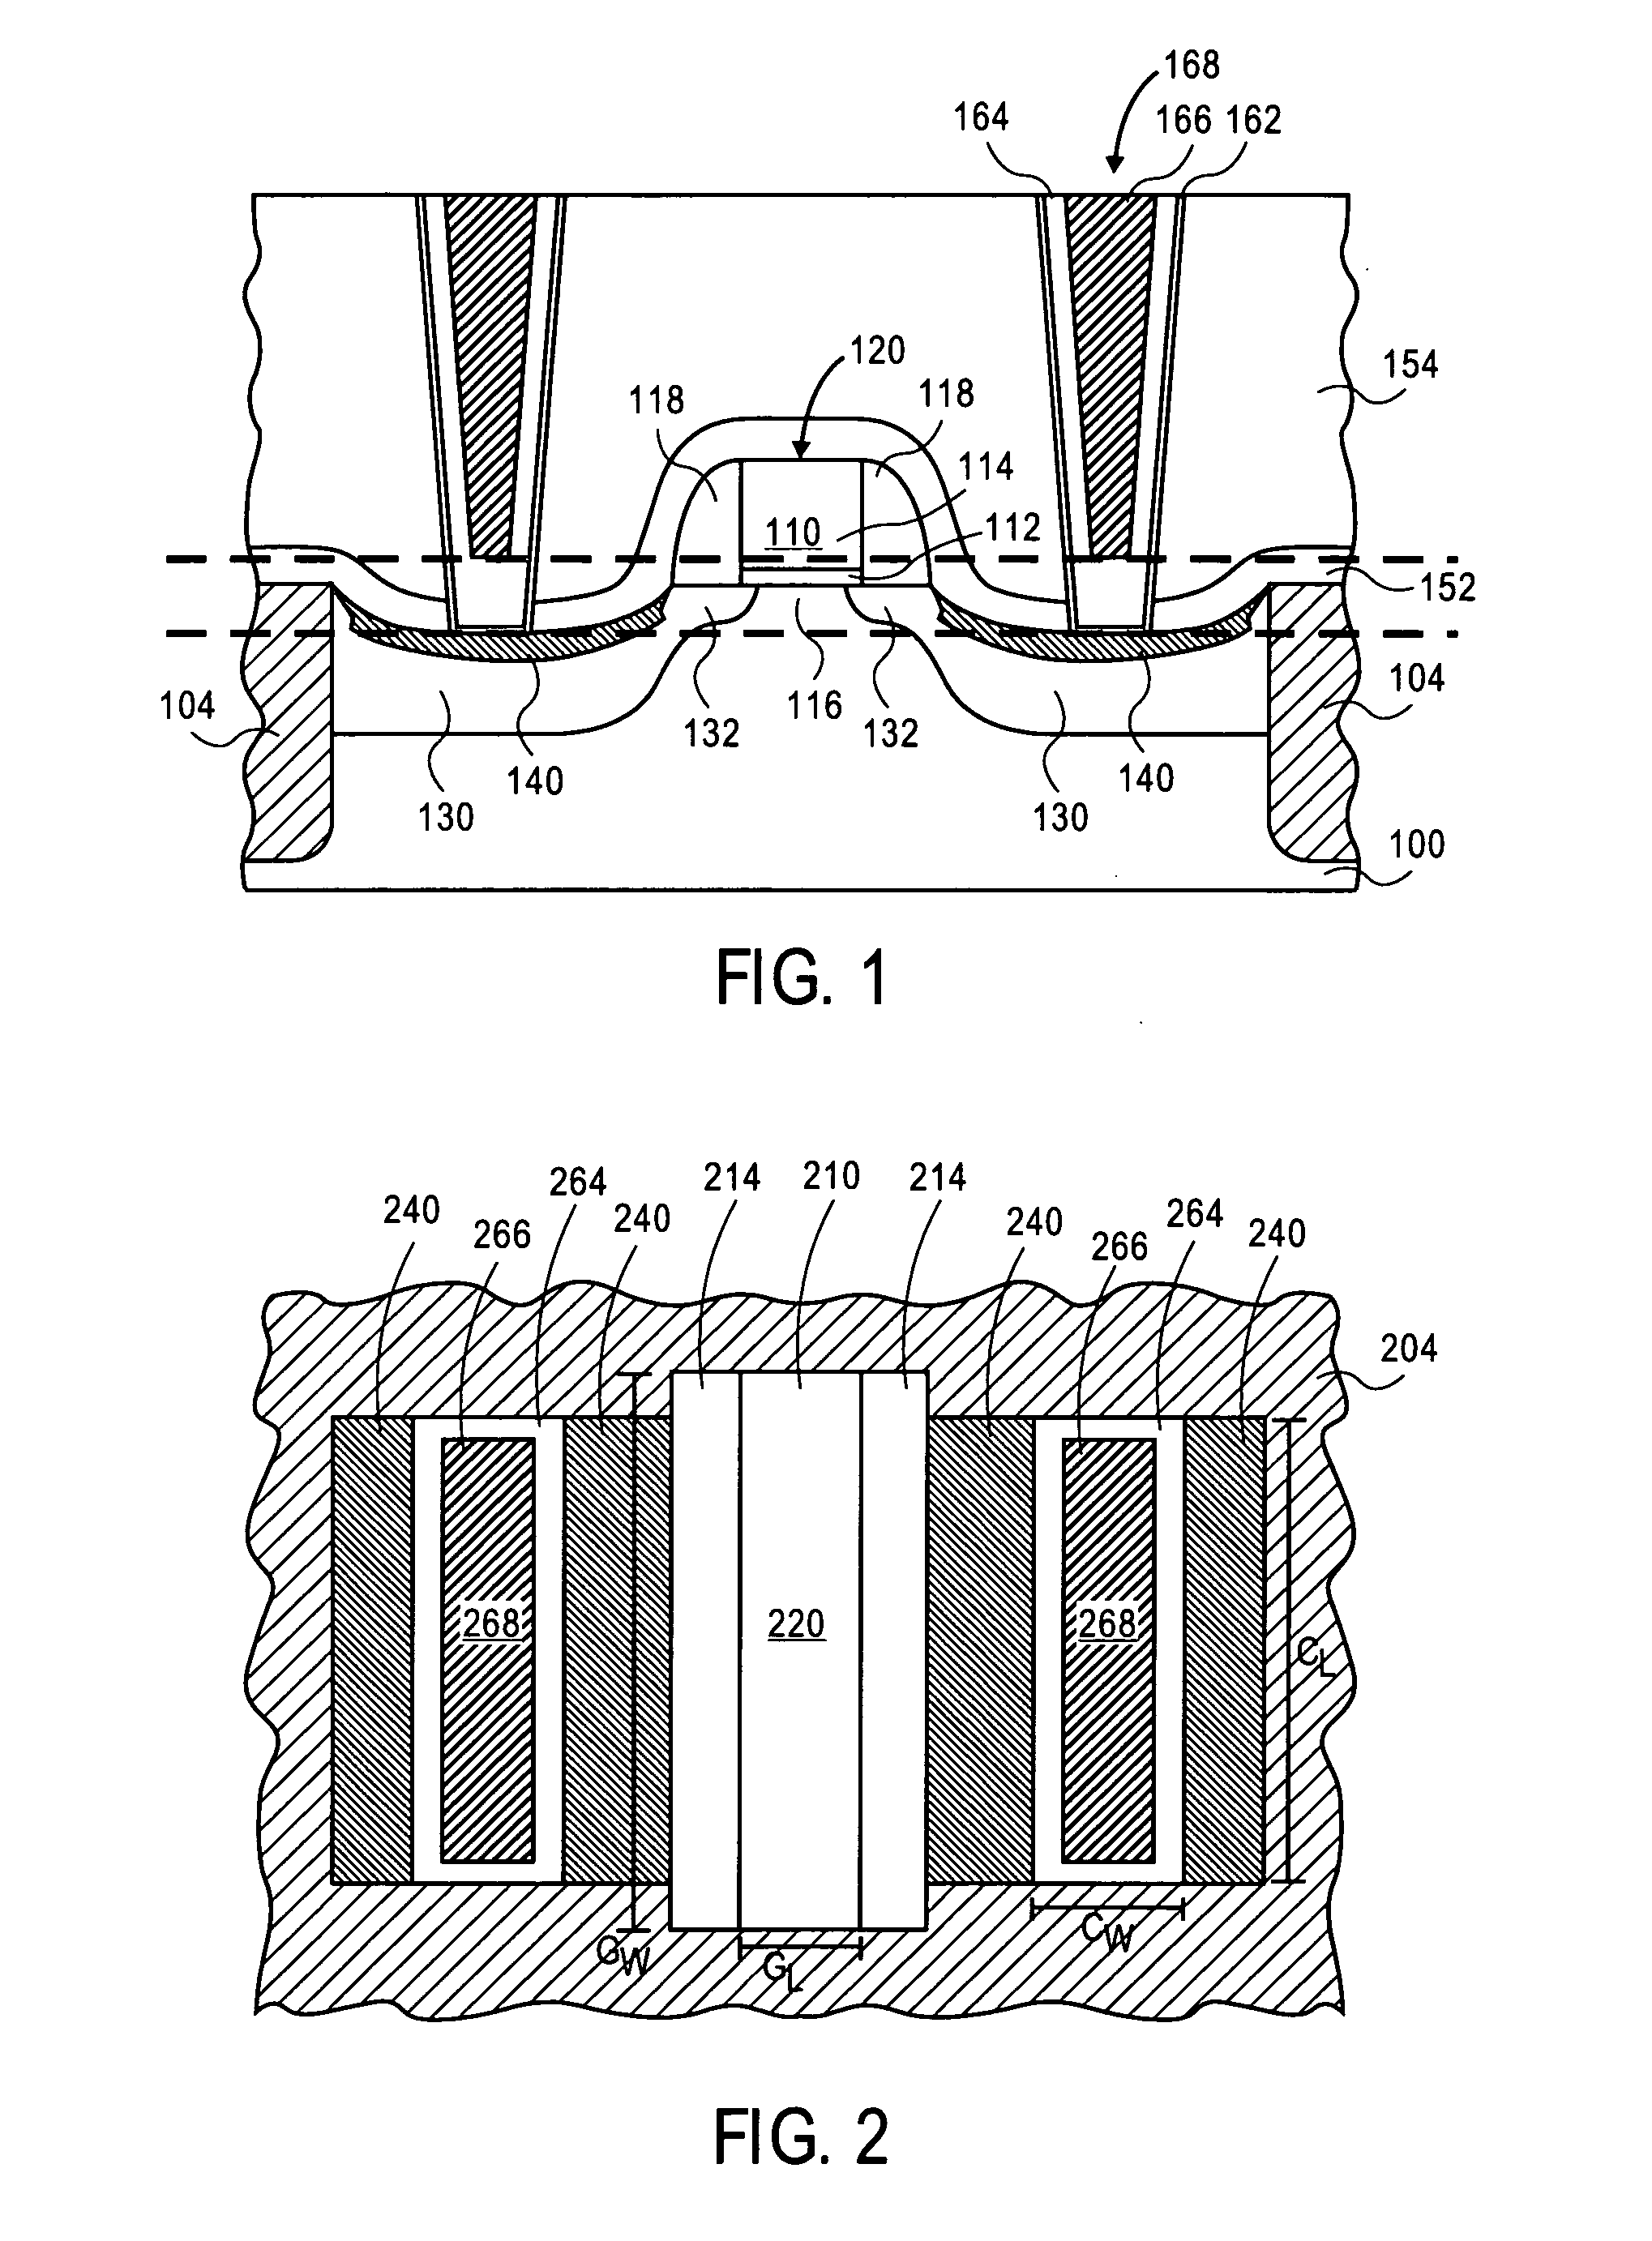 Stressed barrier plug slot contact structure for transistor performance enhancement